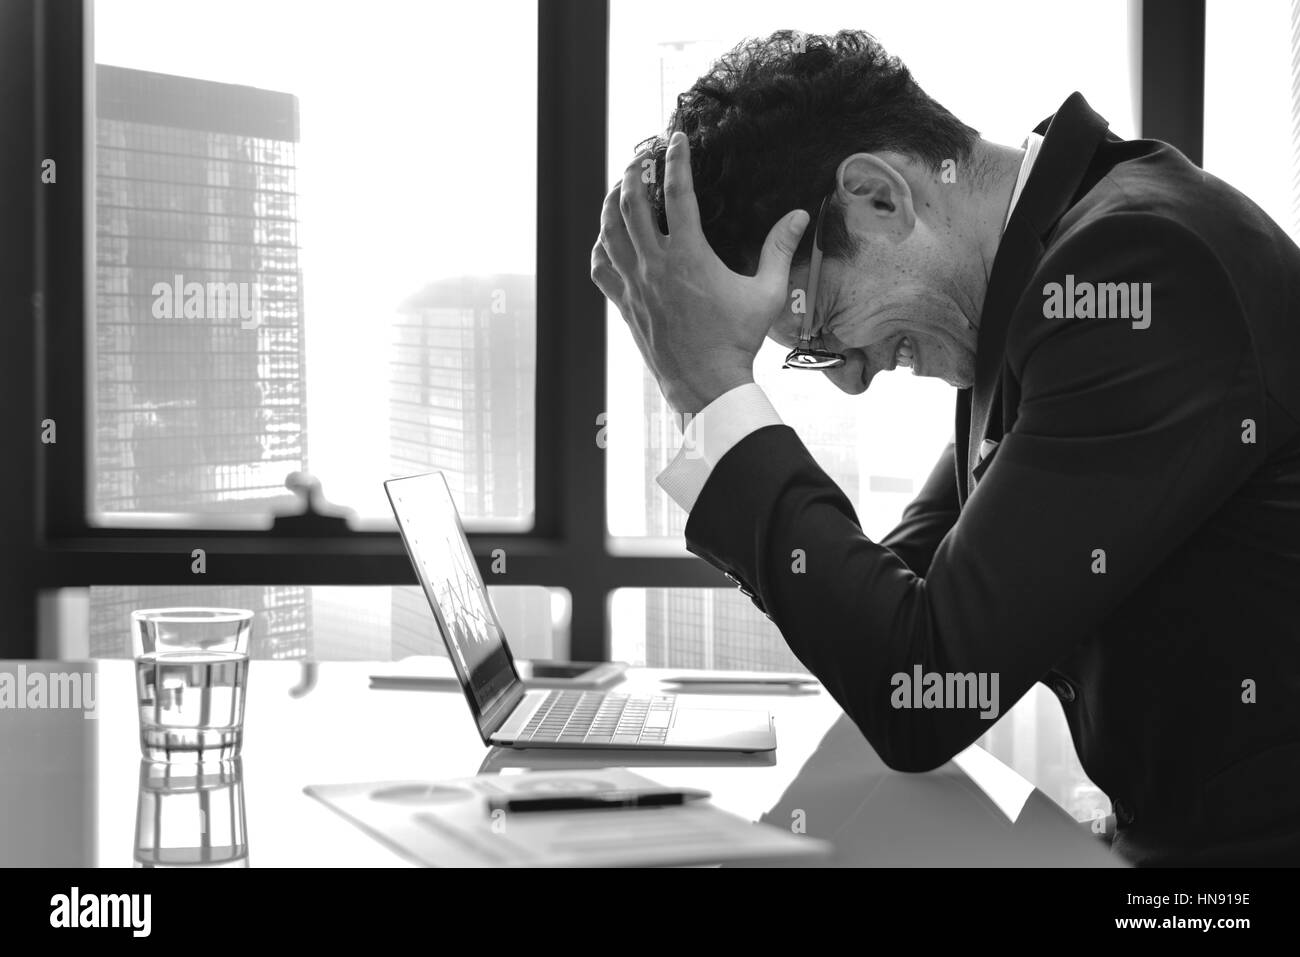 Stress Serious Planning Business Strategy Working Concept Stock Photo